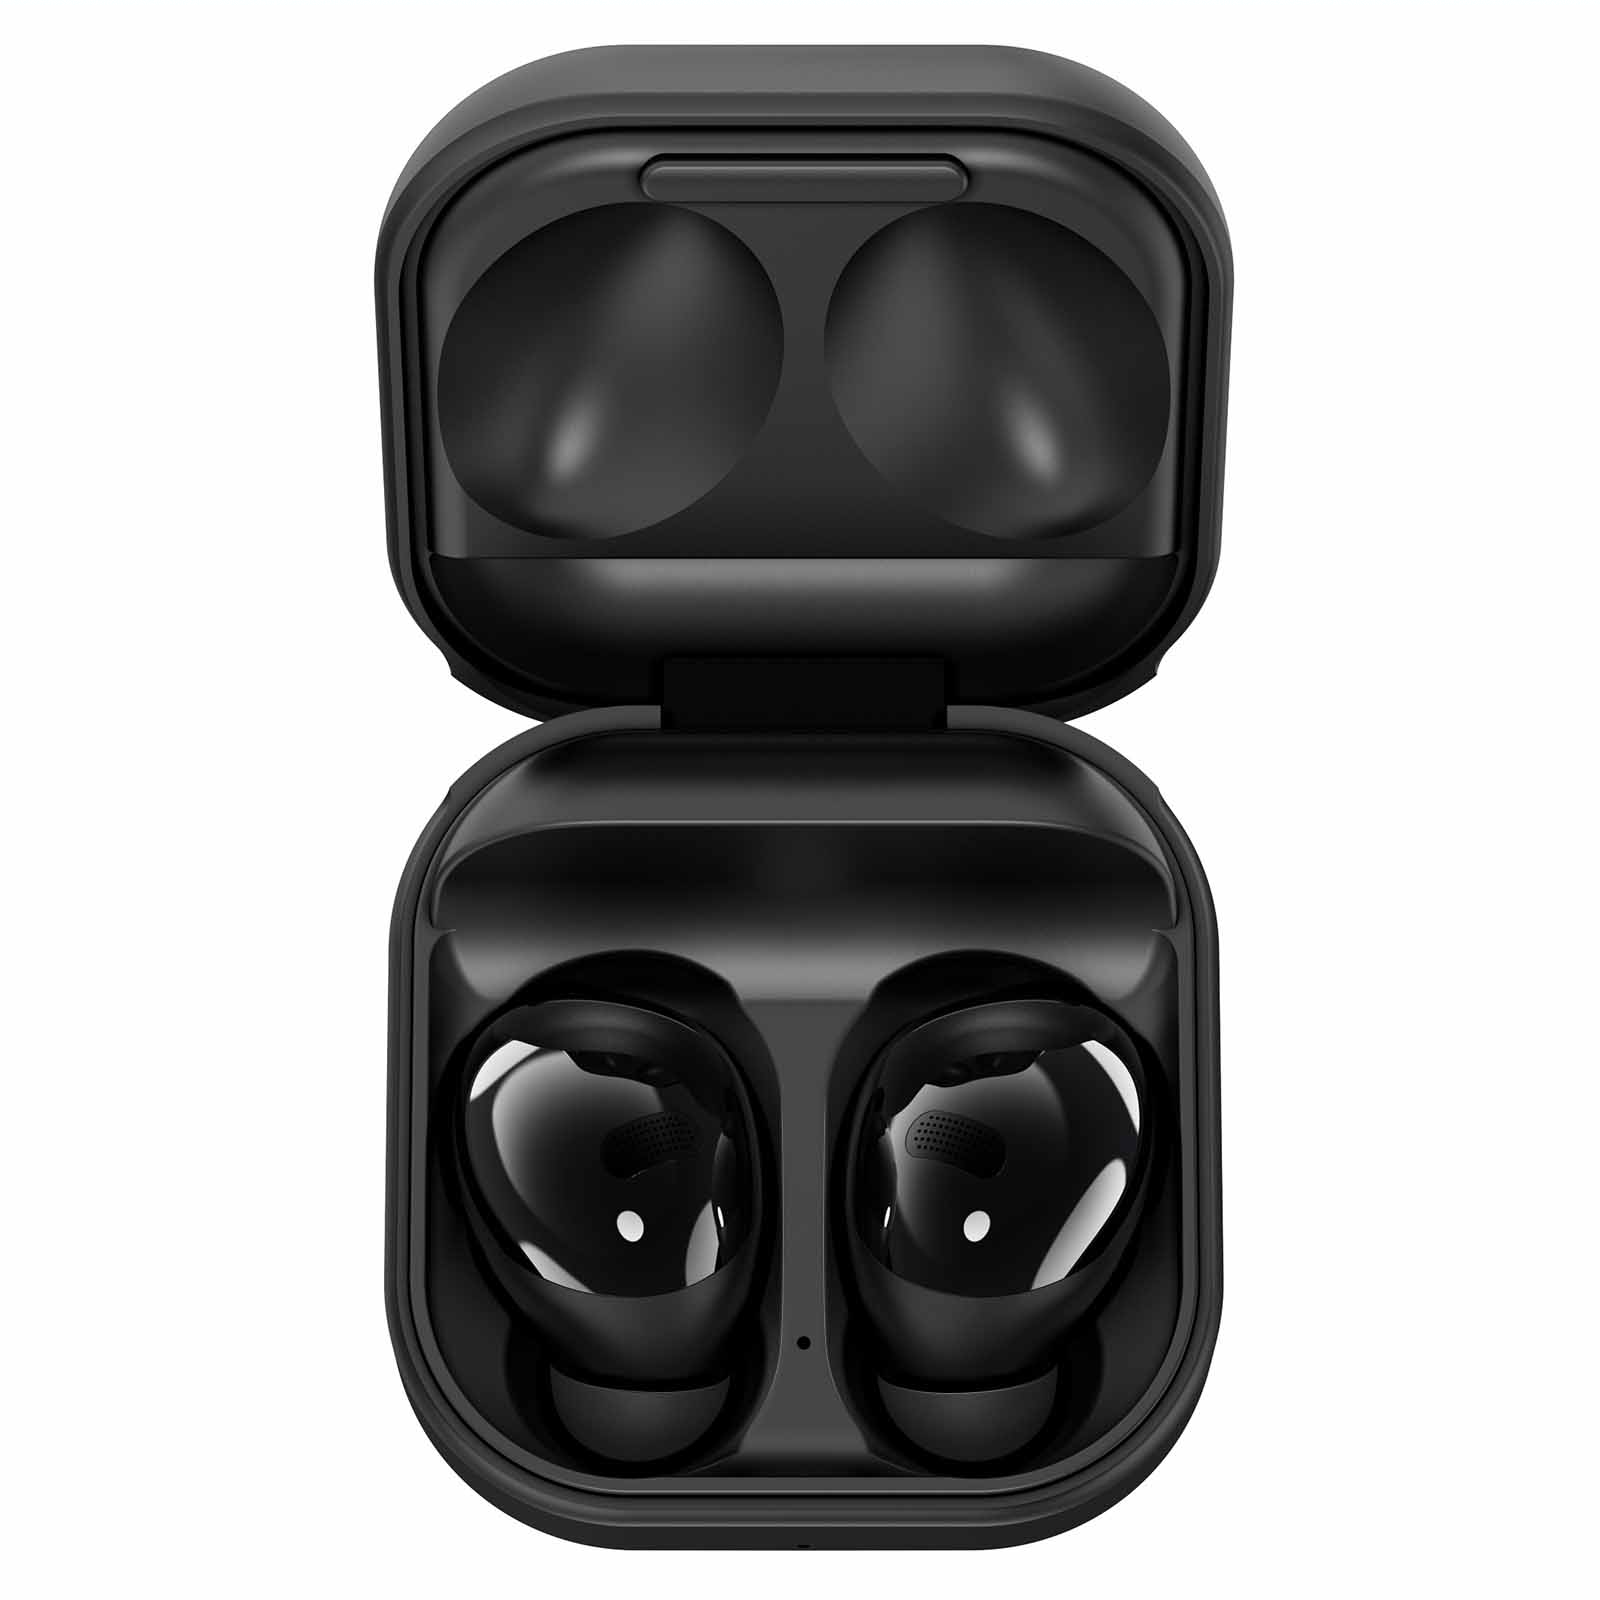 moeder Annoteren Yoghurt UrbanX Street Buds Pro True Bluetooth Wireless Earbuds For Gionee M7 Plus  With Active Noise Cancelling (Wireless Charging Case Included) Black -  Walmart.com